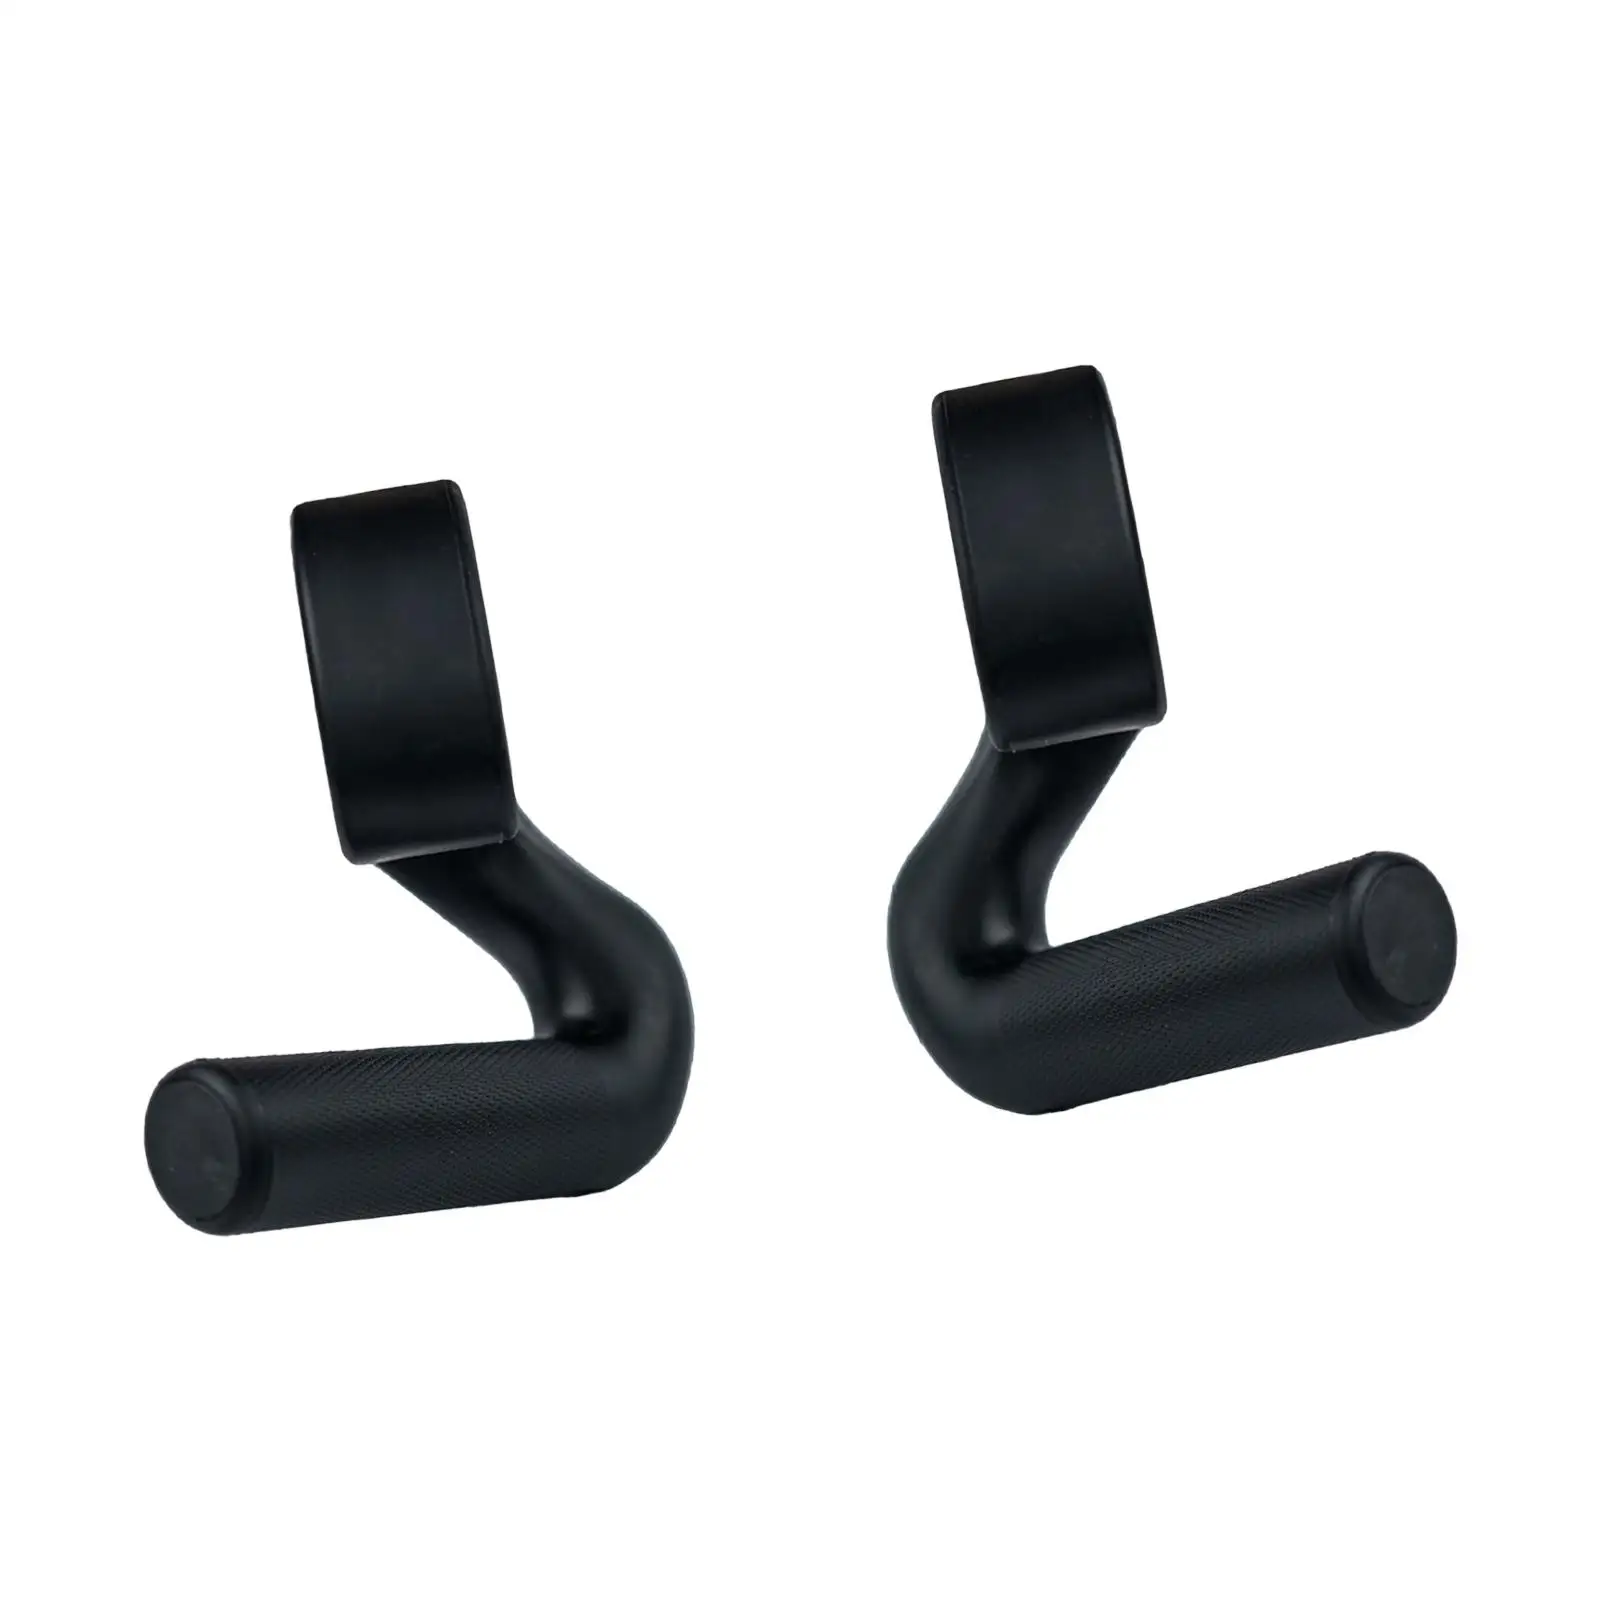 2Pcs Pull up Handles 45 Degree Angled for Workout Dumbbell Row Attachment